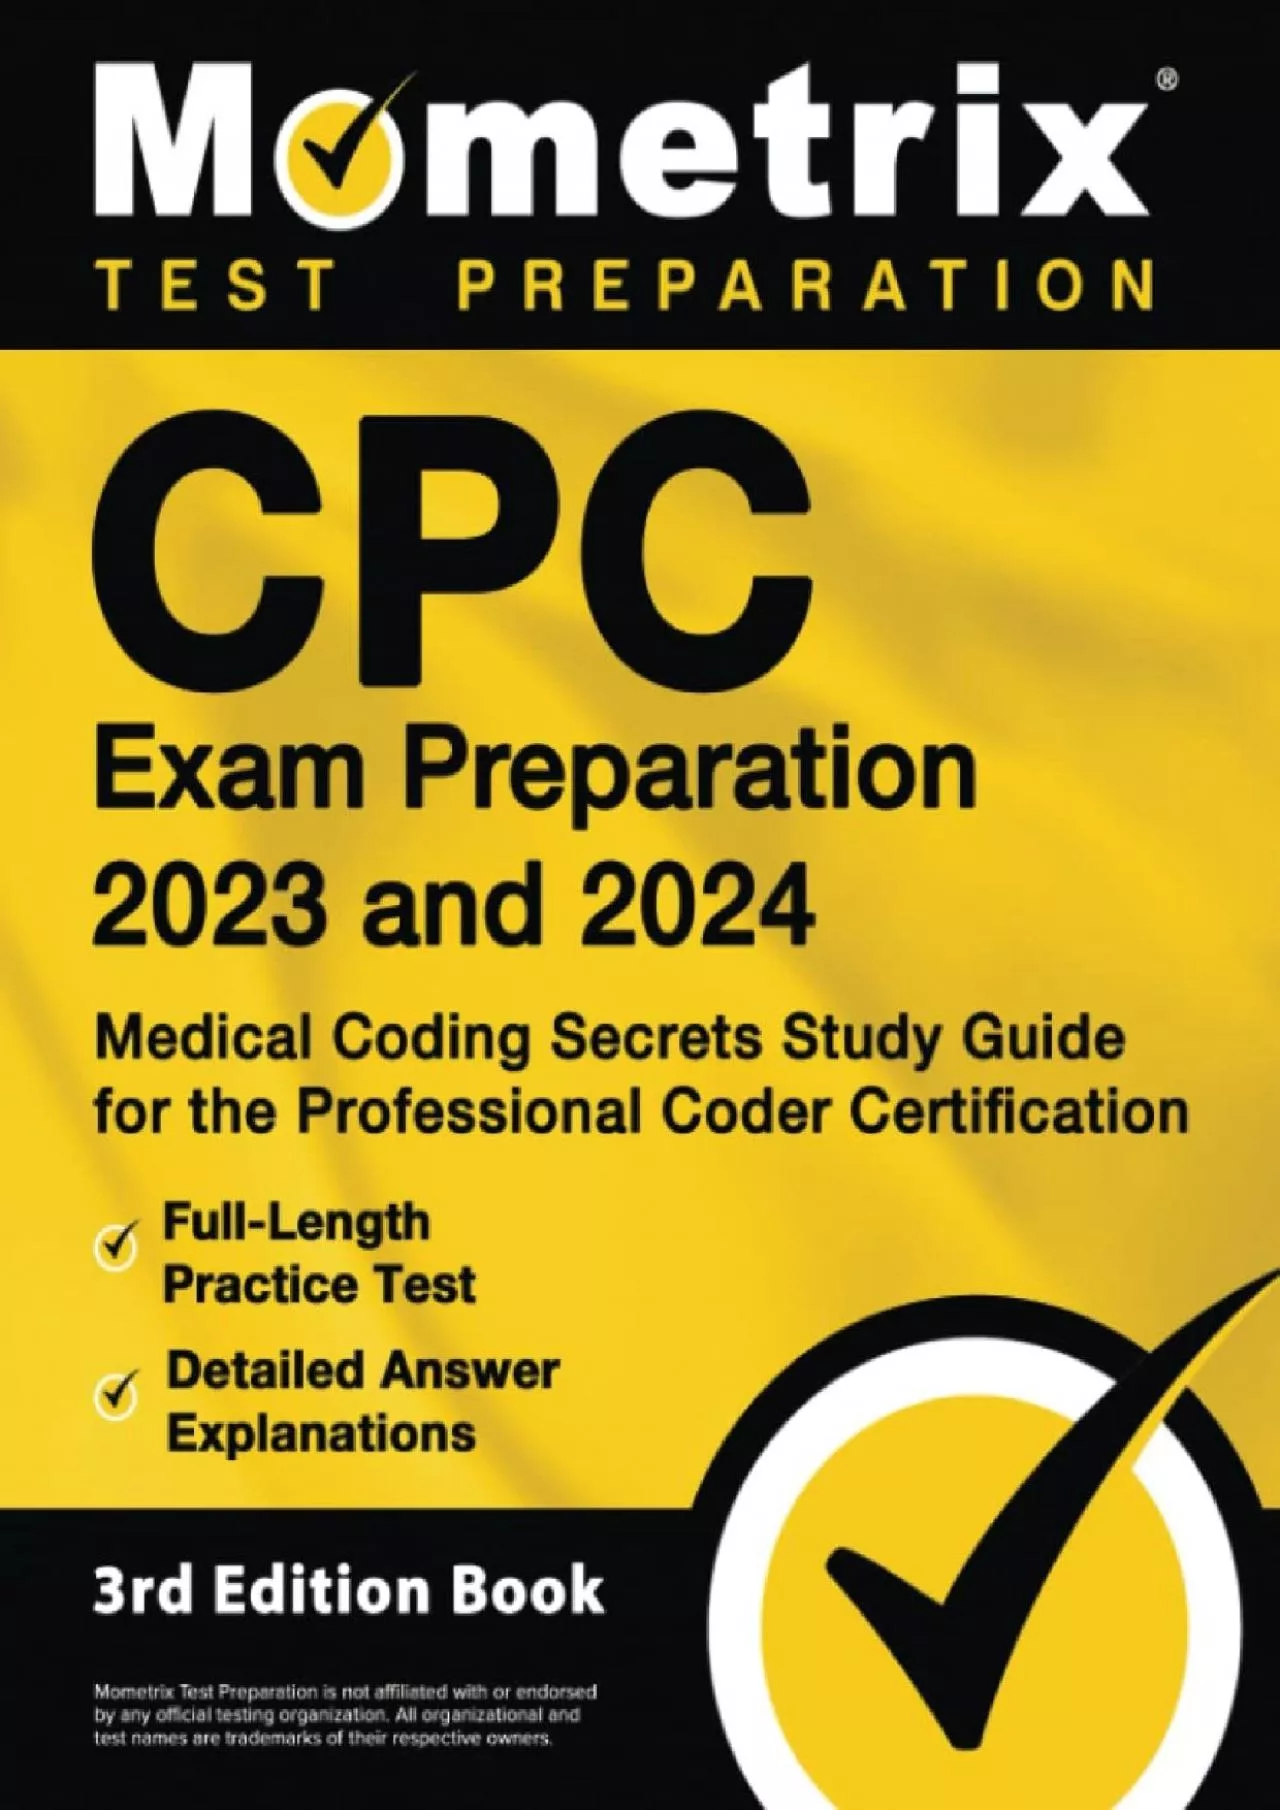 [DOWNLOAD] CPC Exam Preparation 2023 and 2024 - Medical Coding Secrets Study Guide for